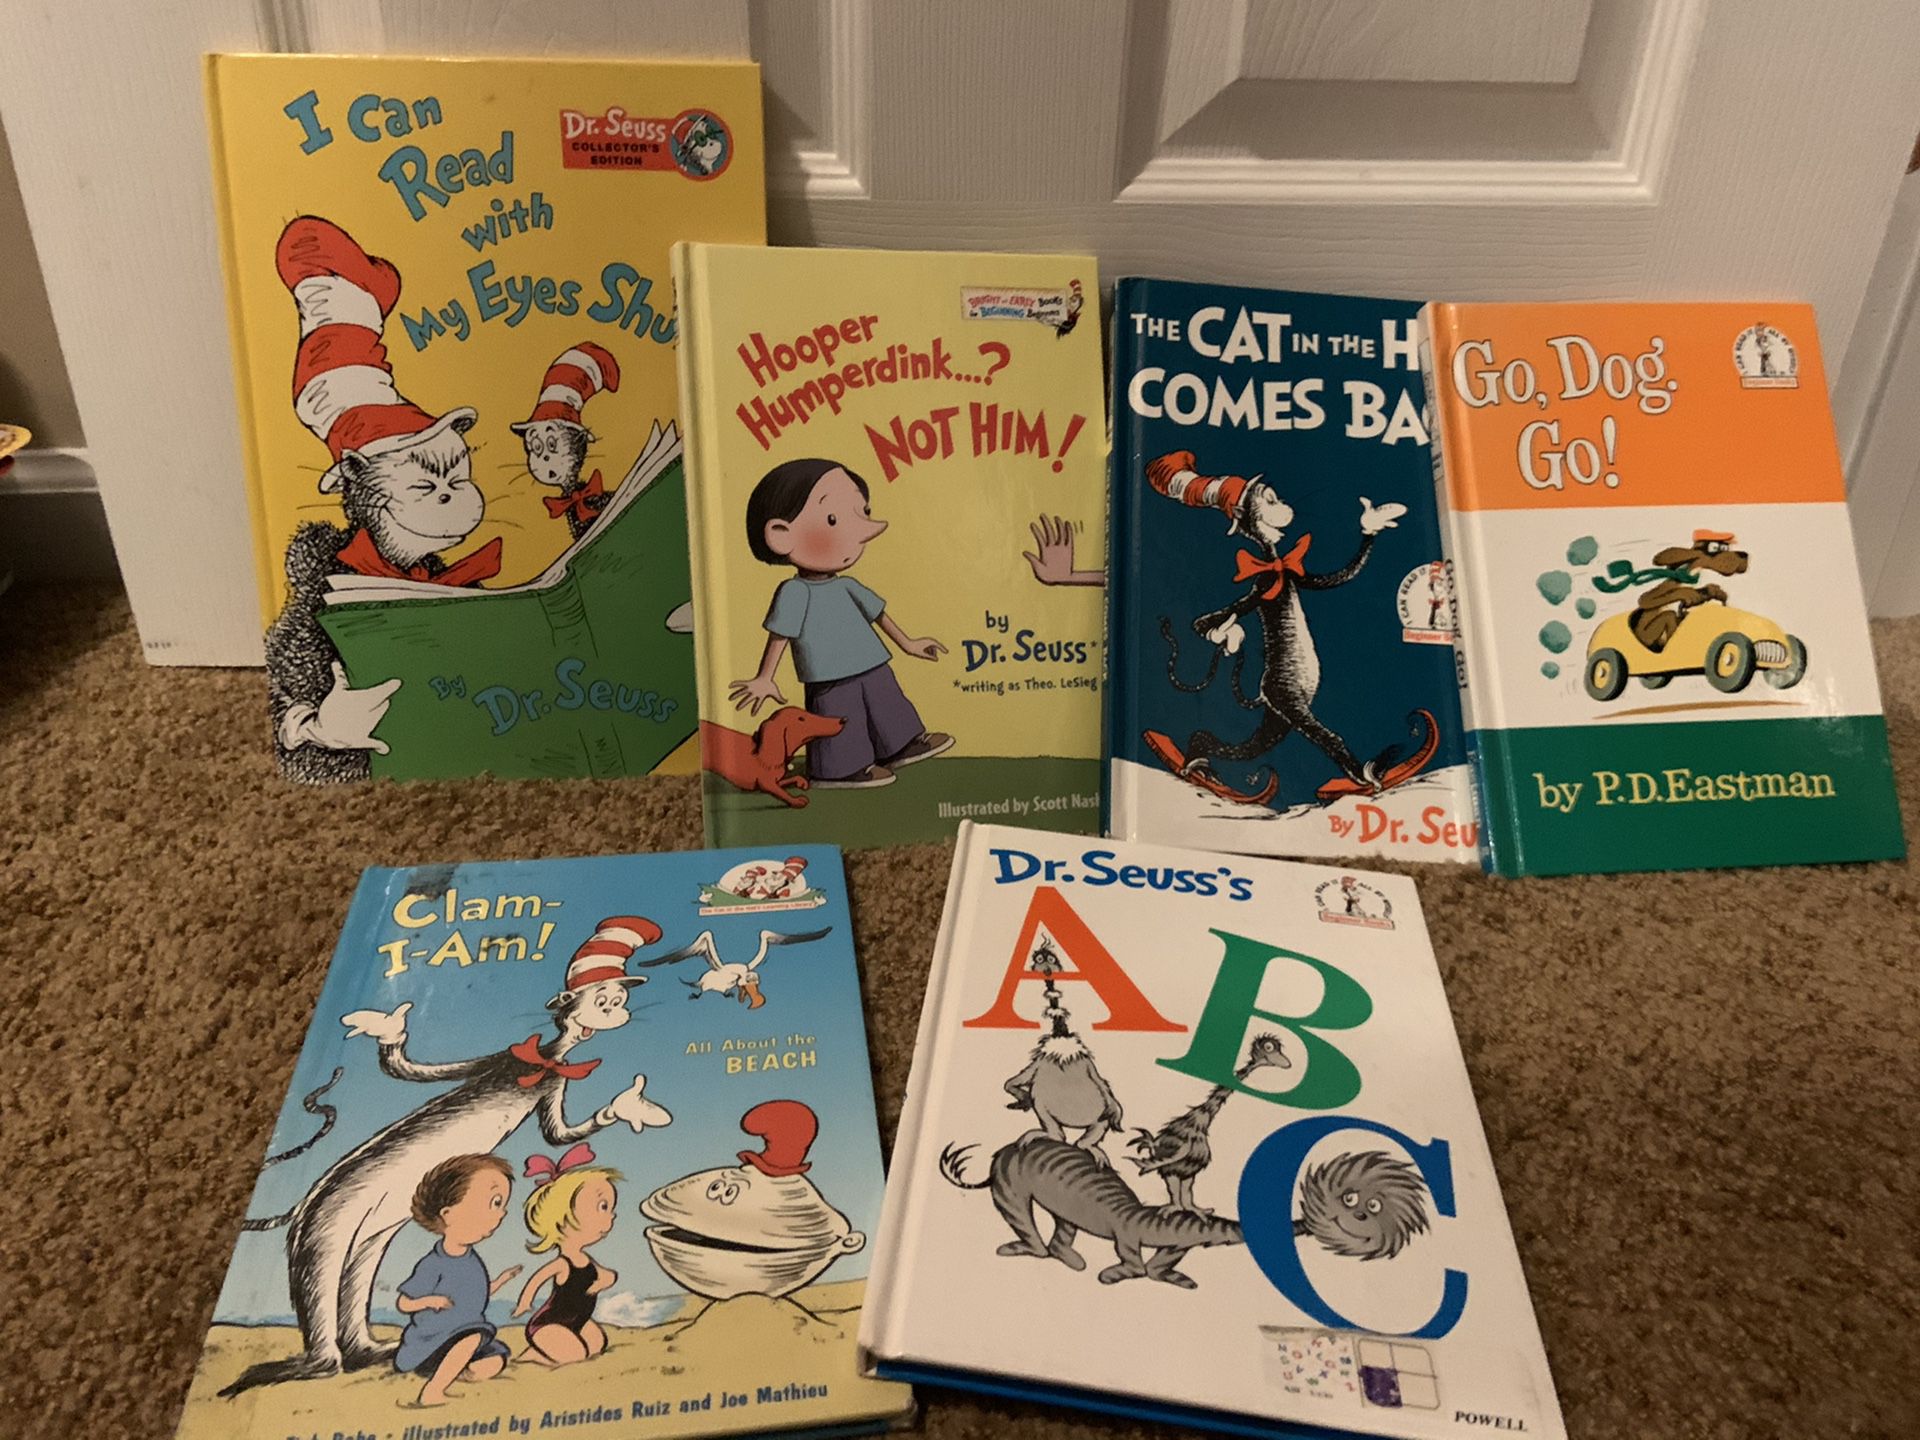 Dr Seuss Hard cover books Cat in the hat comes back, Go, Dog, Go!, Hooper Humperdink..? Not him!, Clam I am, Dr. Seuss ABC $3 each or all 6 books fo